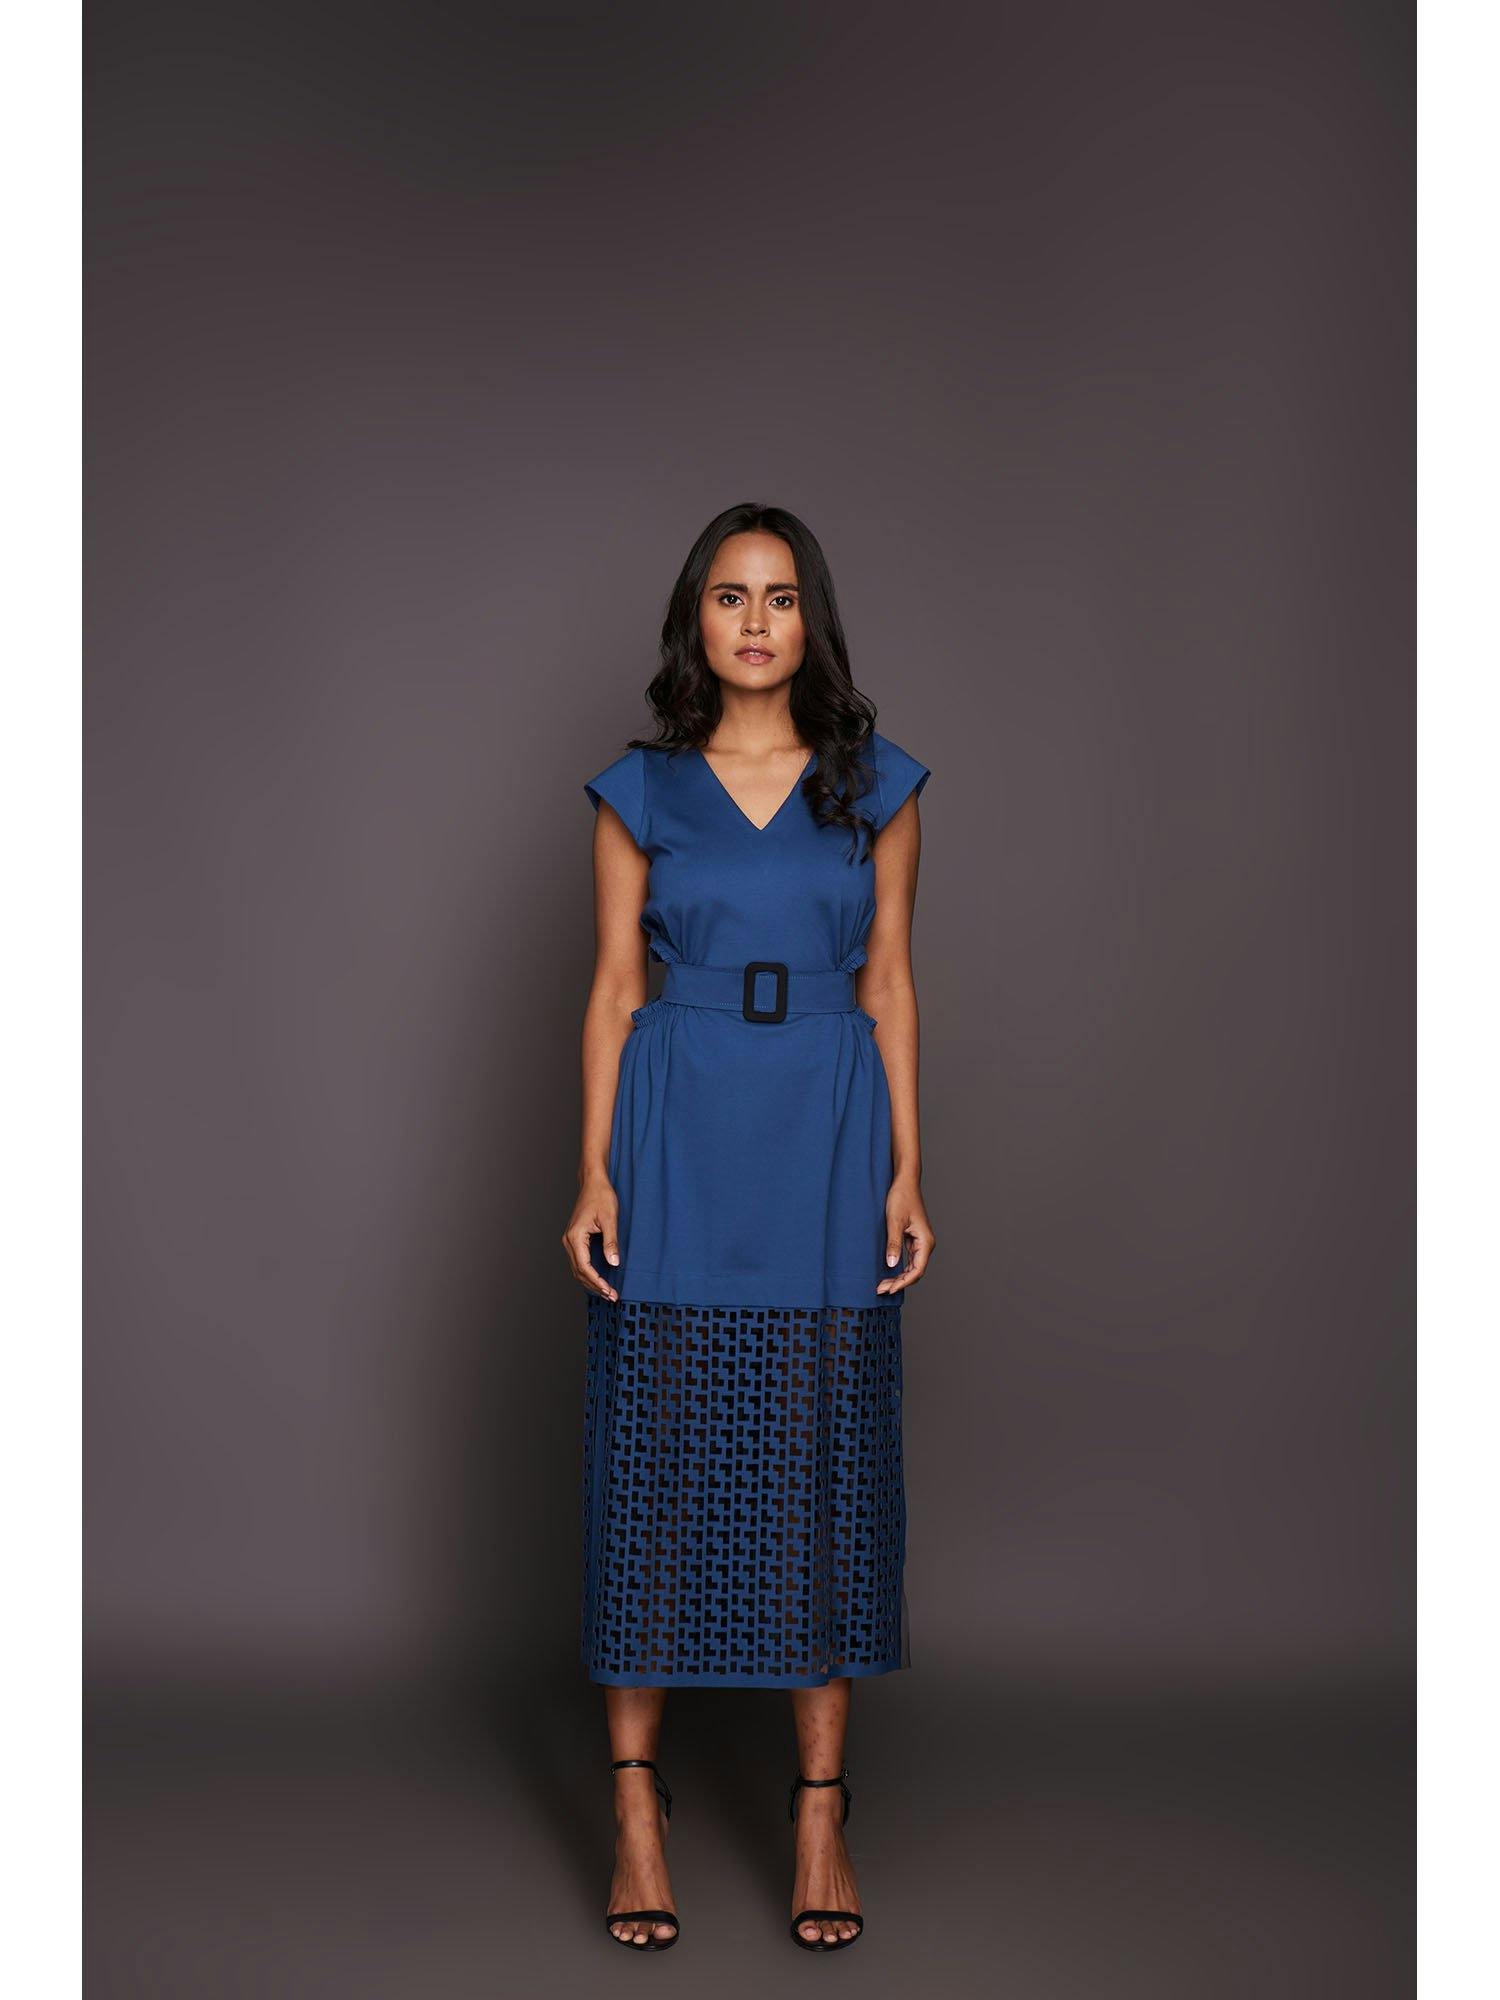 blue dress with cutwork at the bottom, a product by Deepika Arora